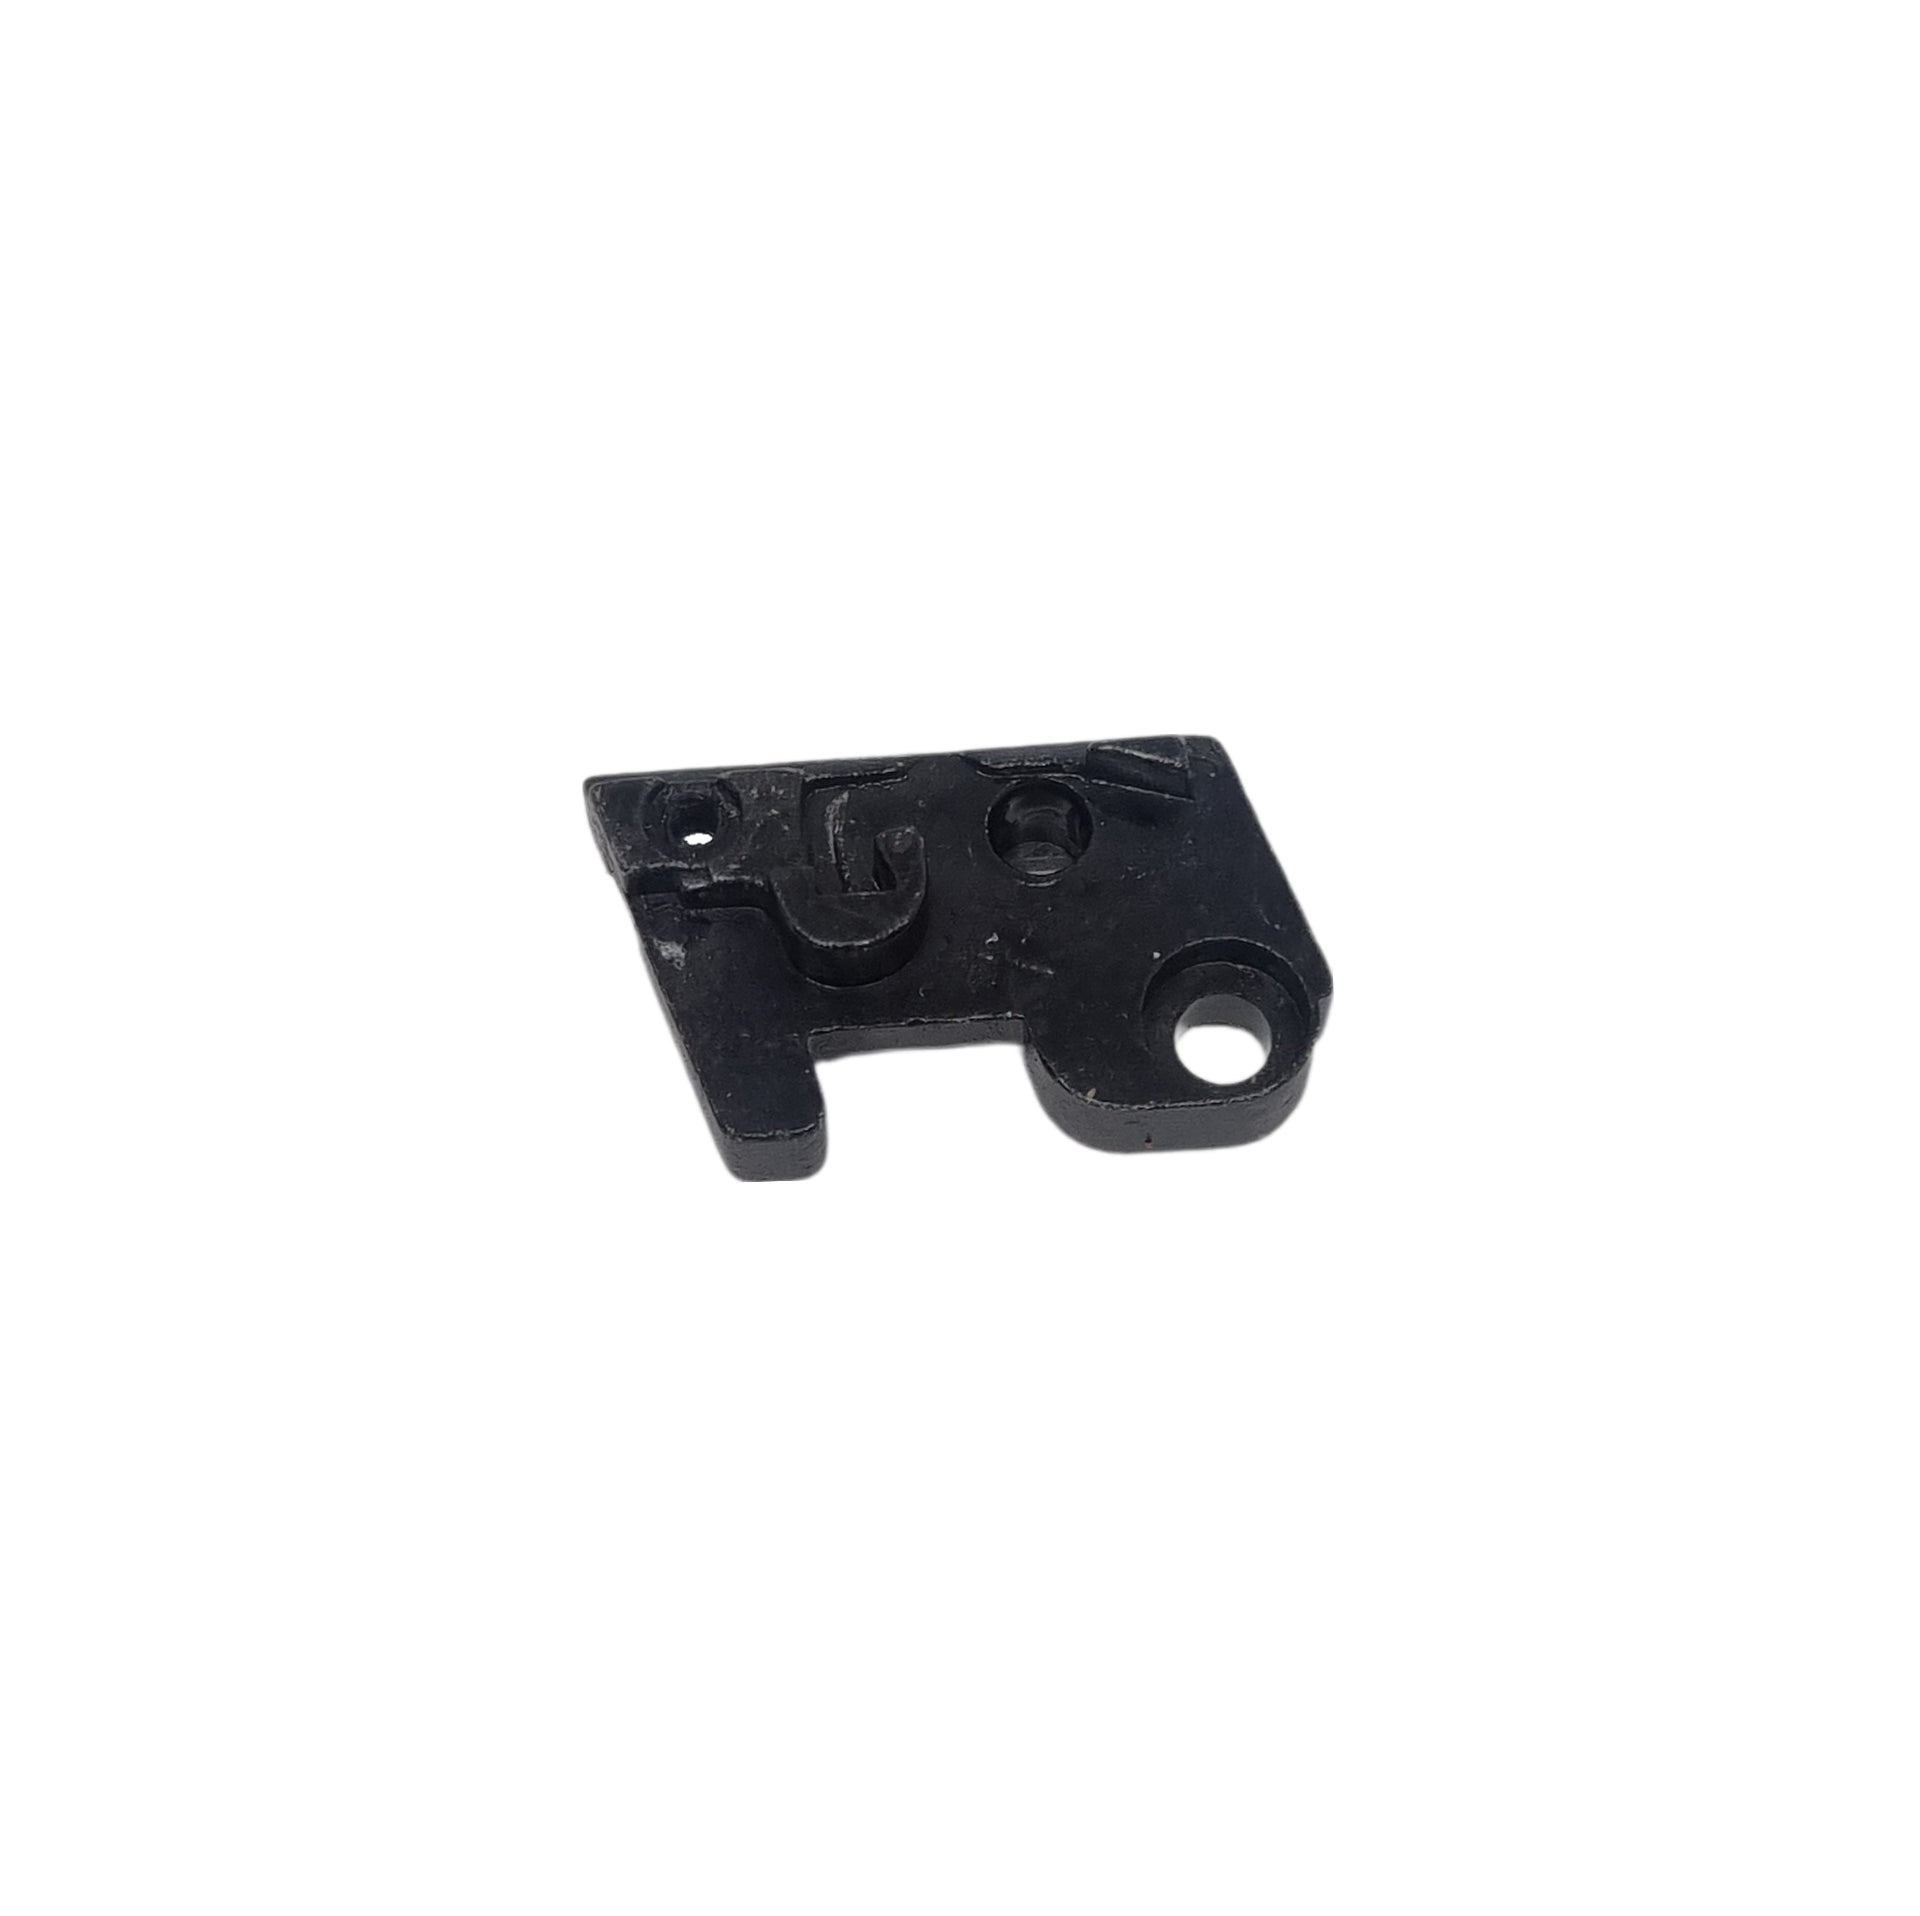 WE Hi-Capa Full Auto Series Replacement Part - 203 - Auto frame chassis